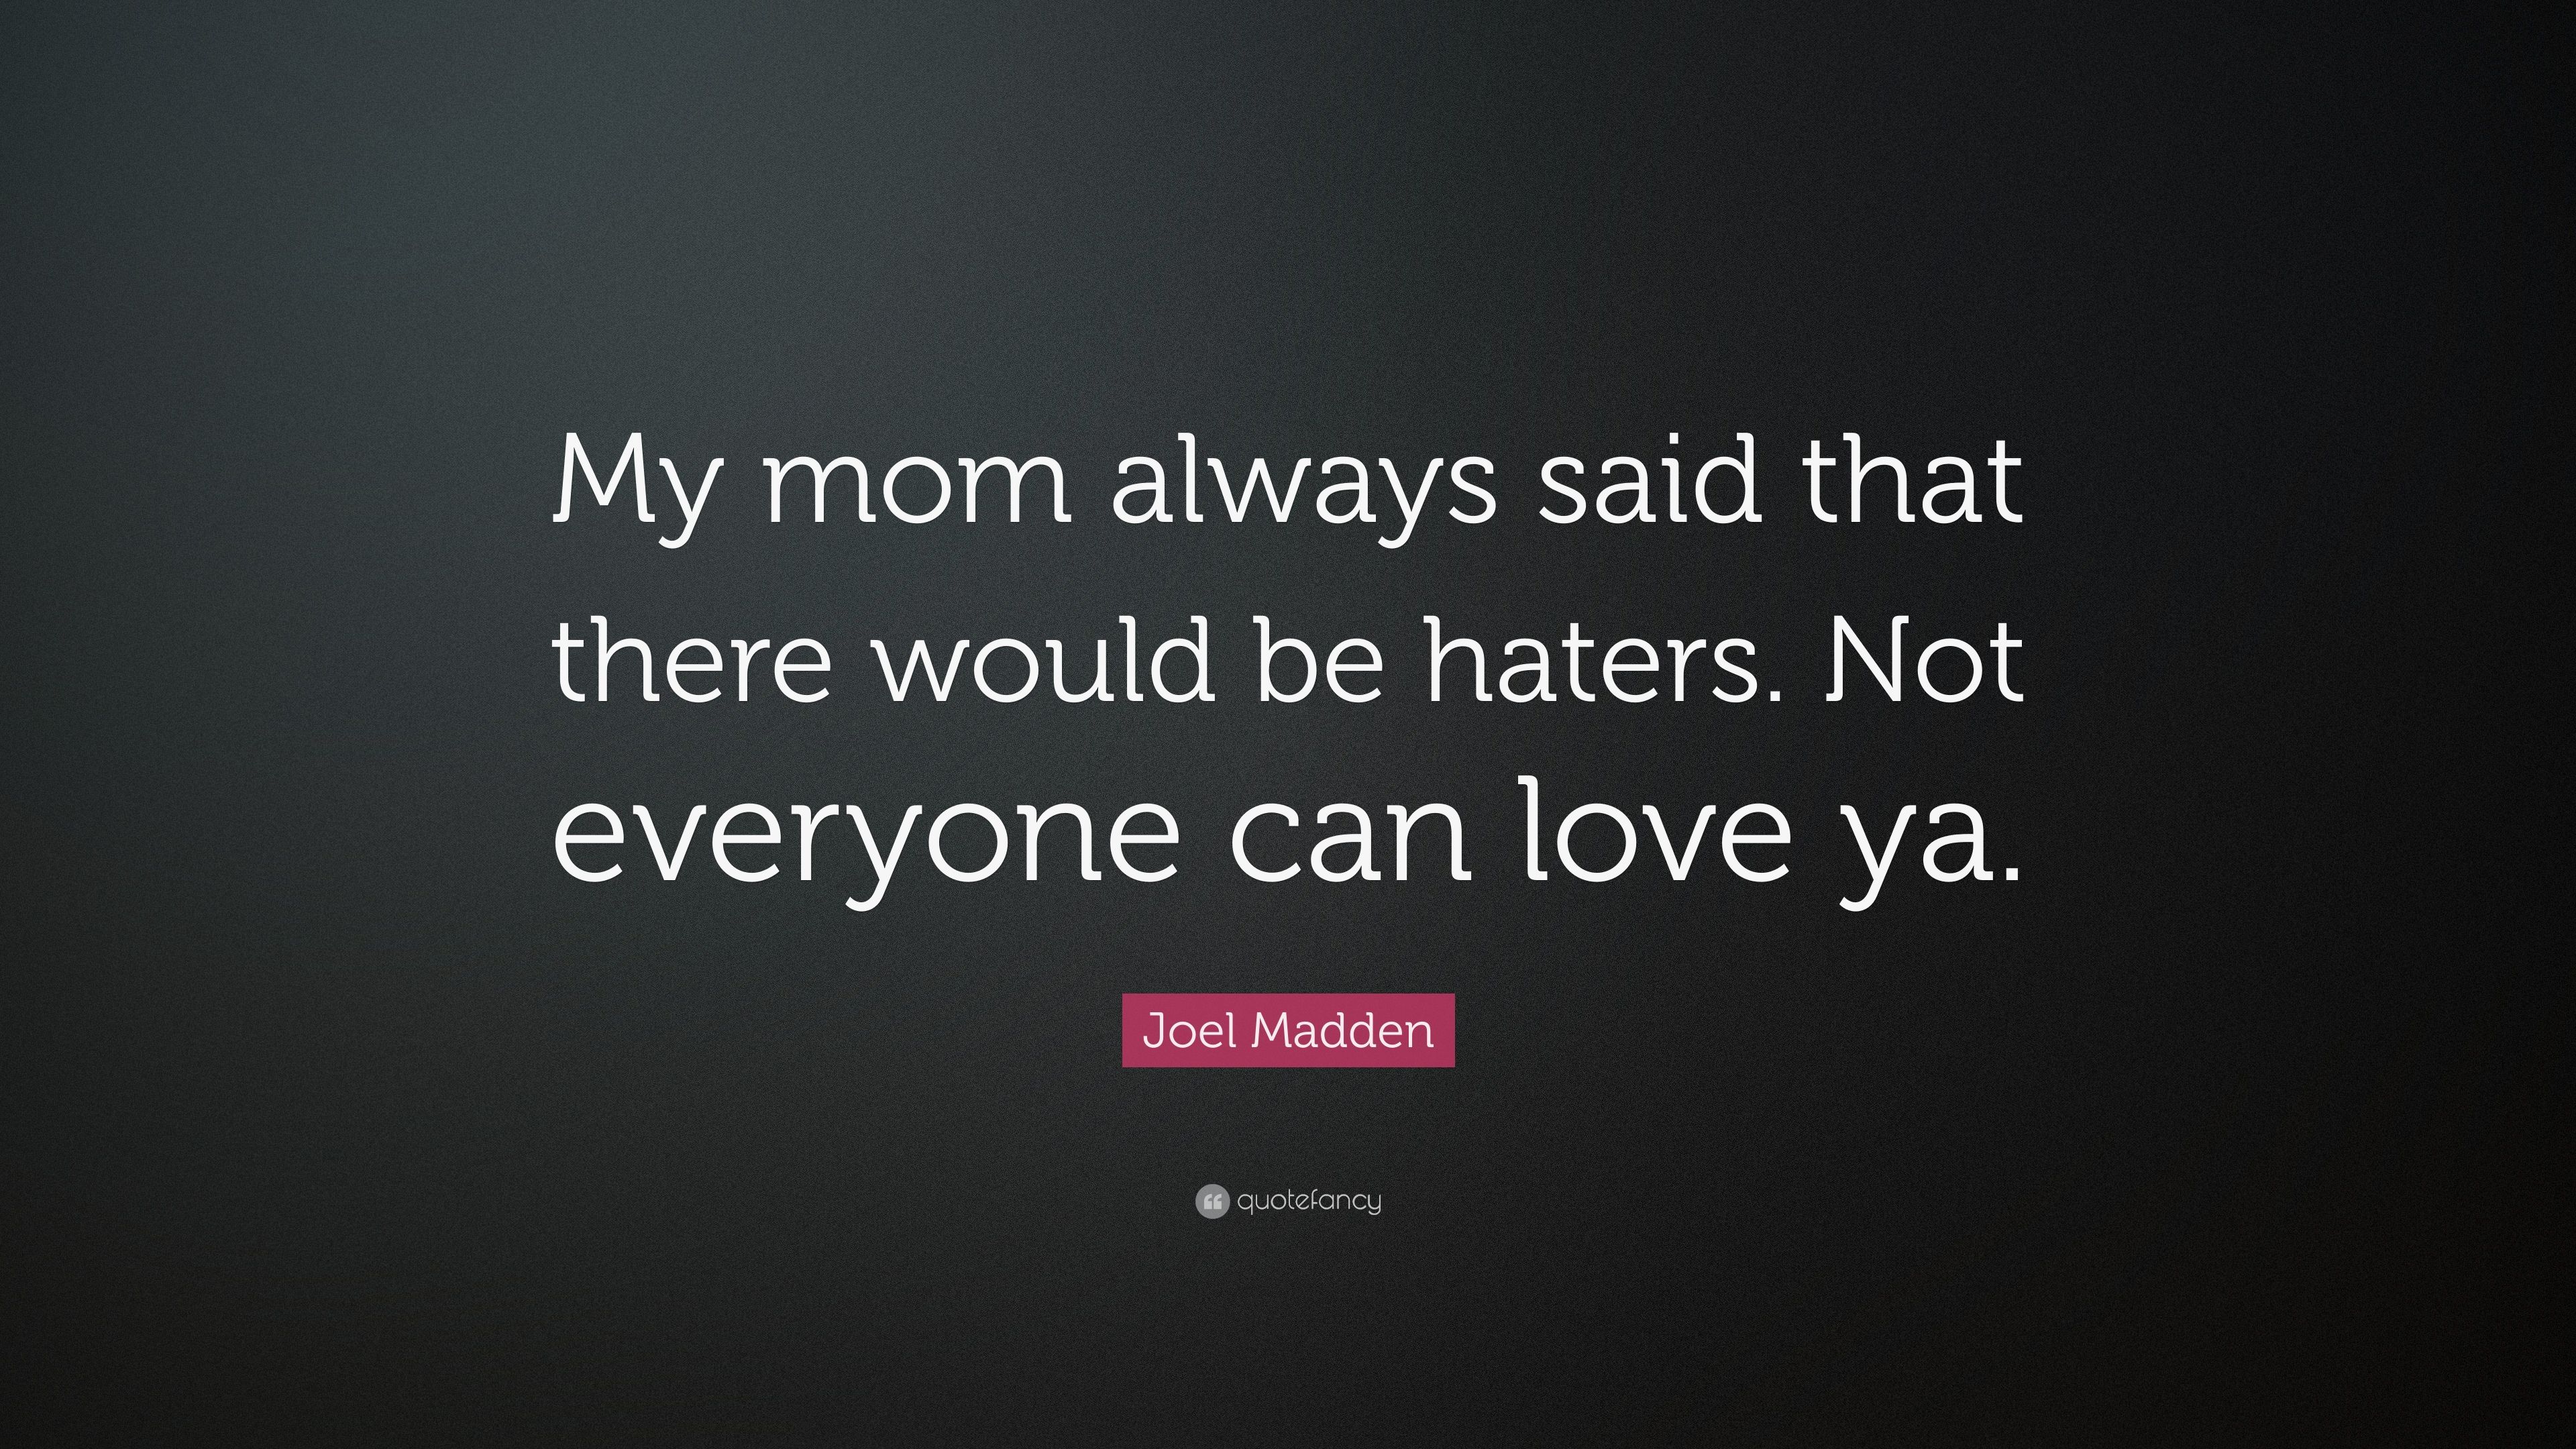 Joel Madden Quote: “My mom always said that there would be haters